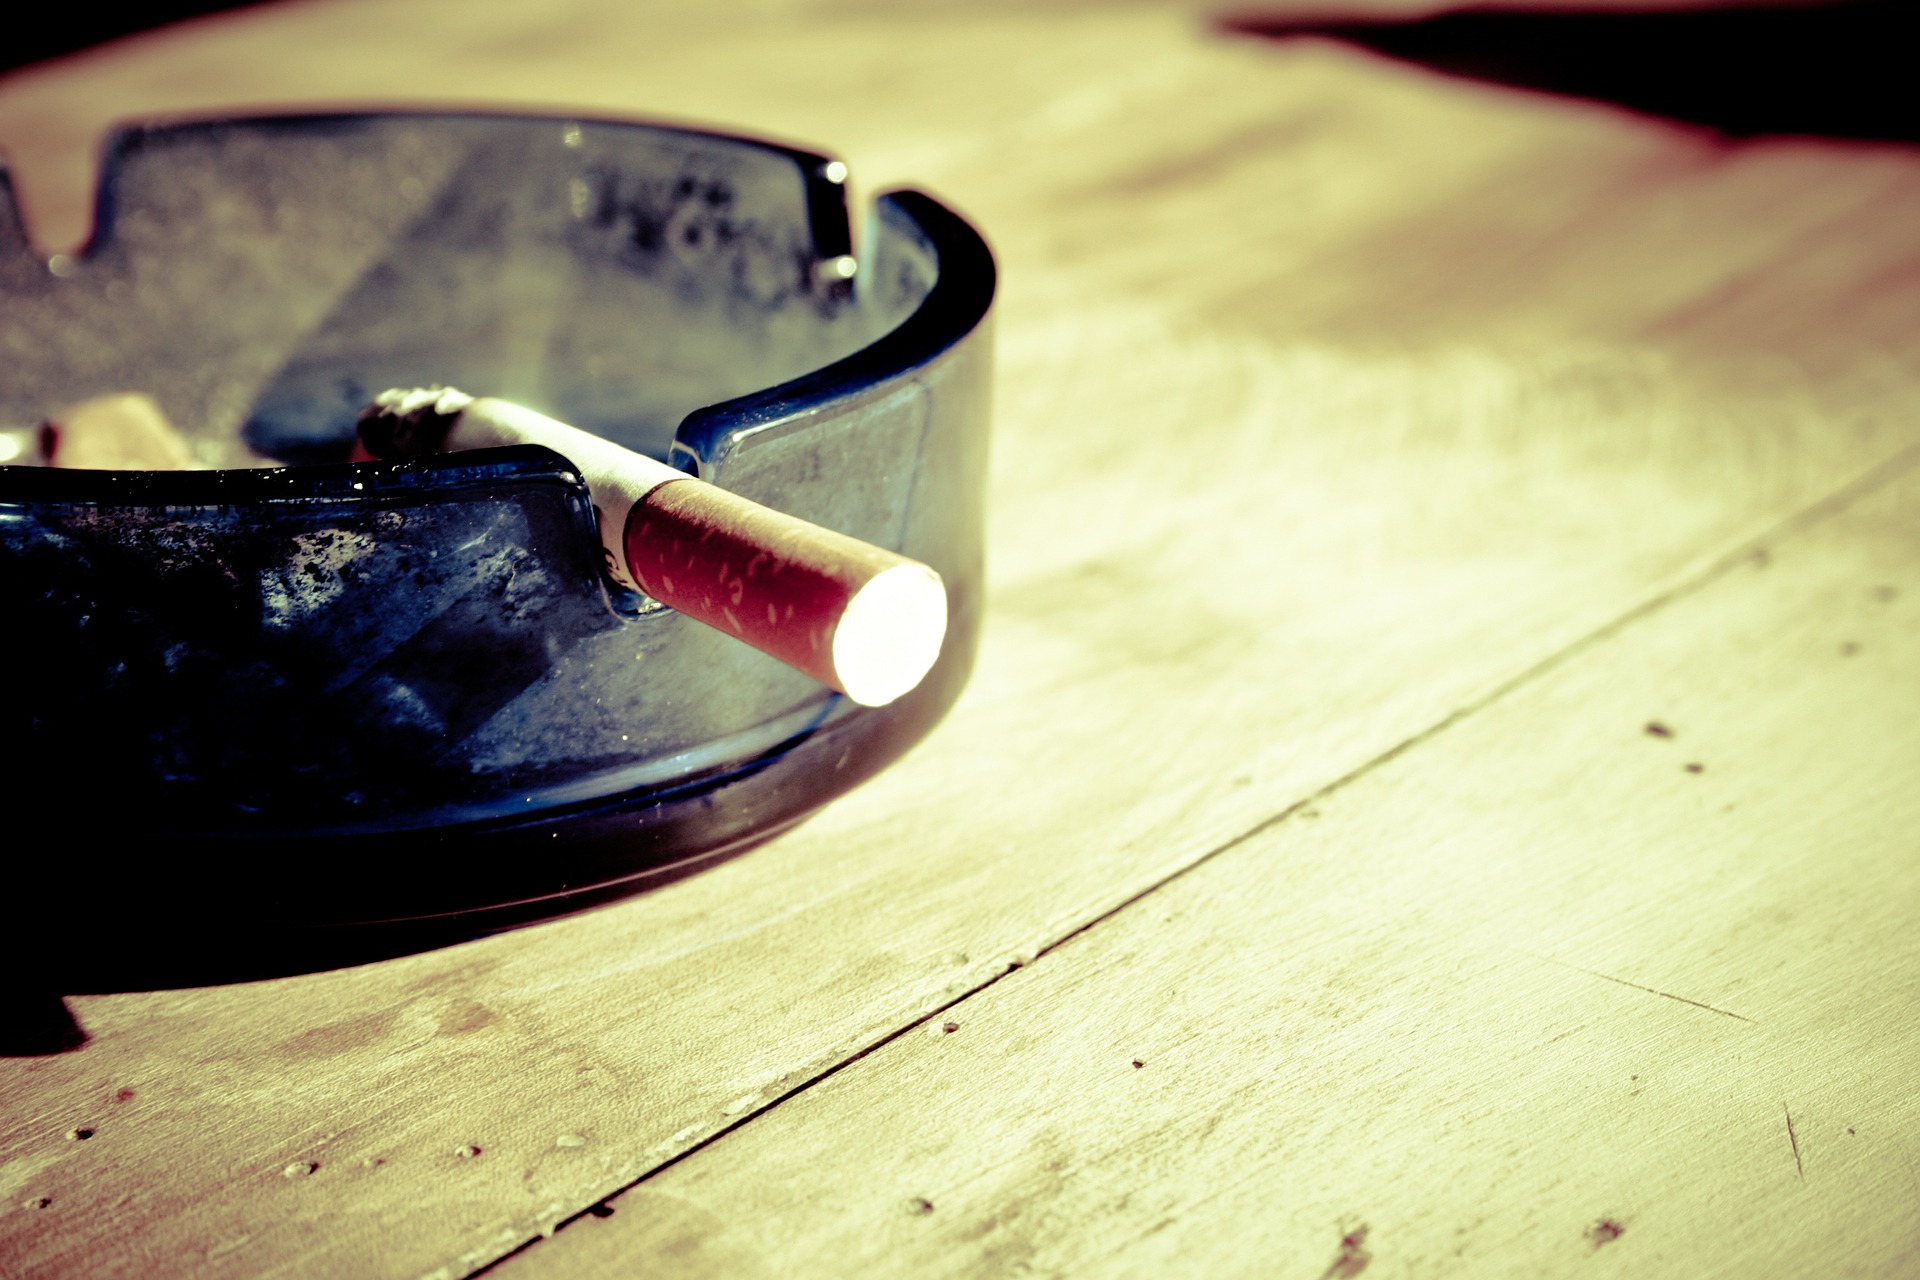 Smoking increases risk for diabetes